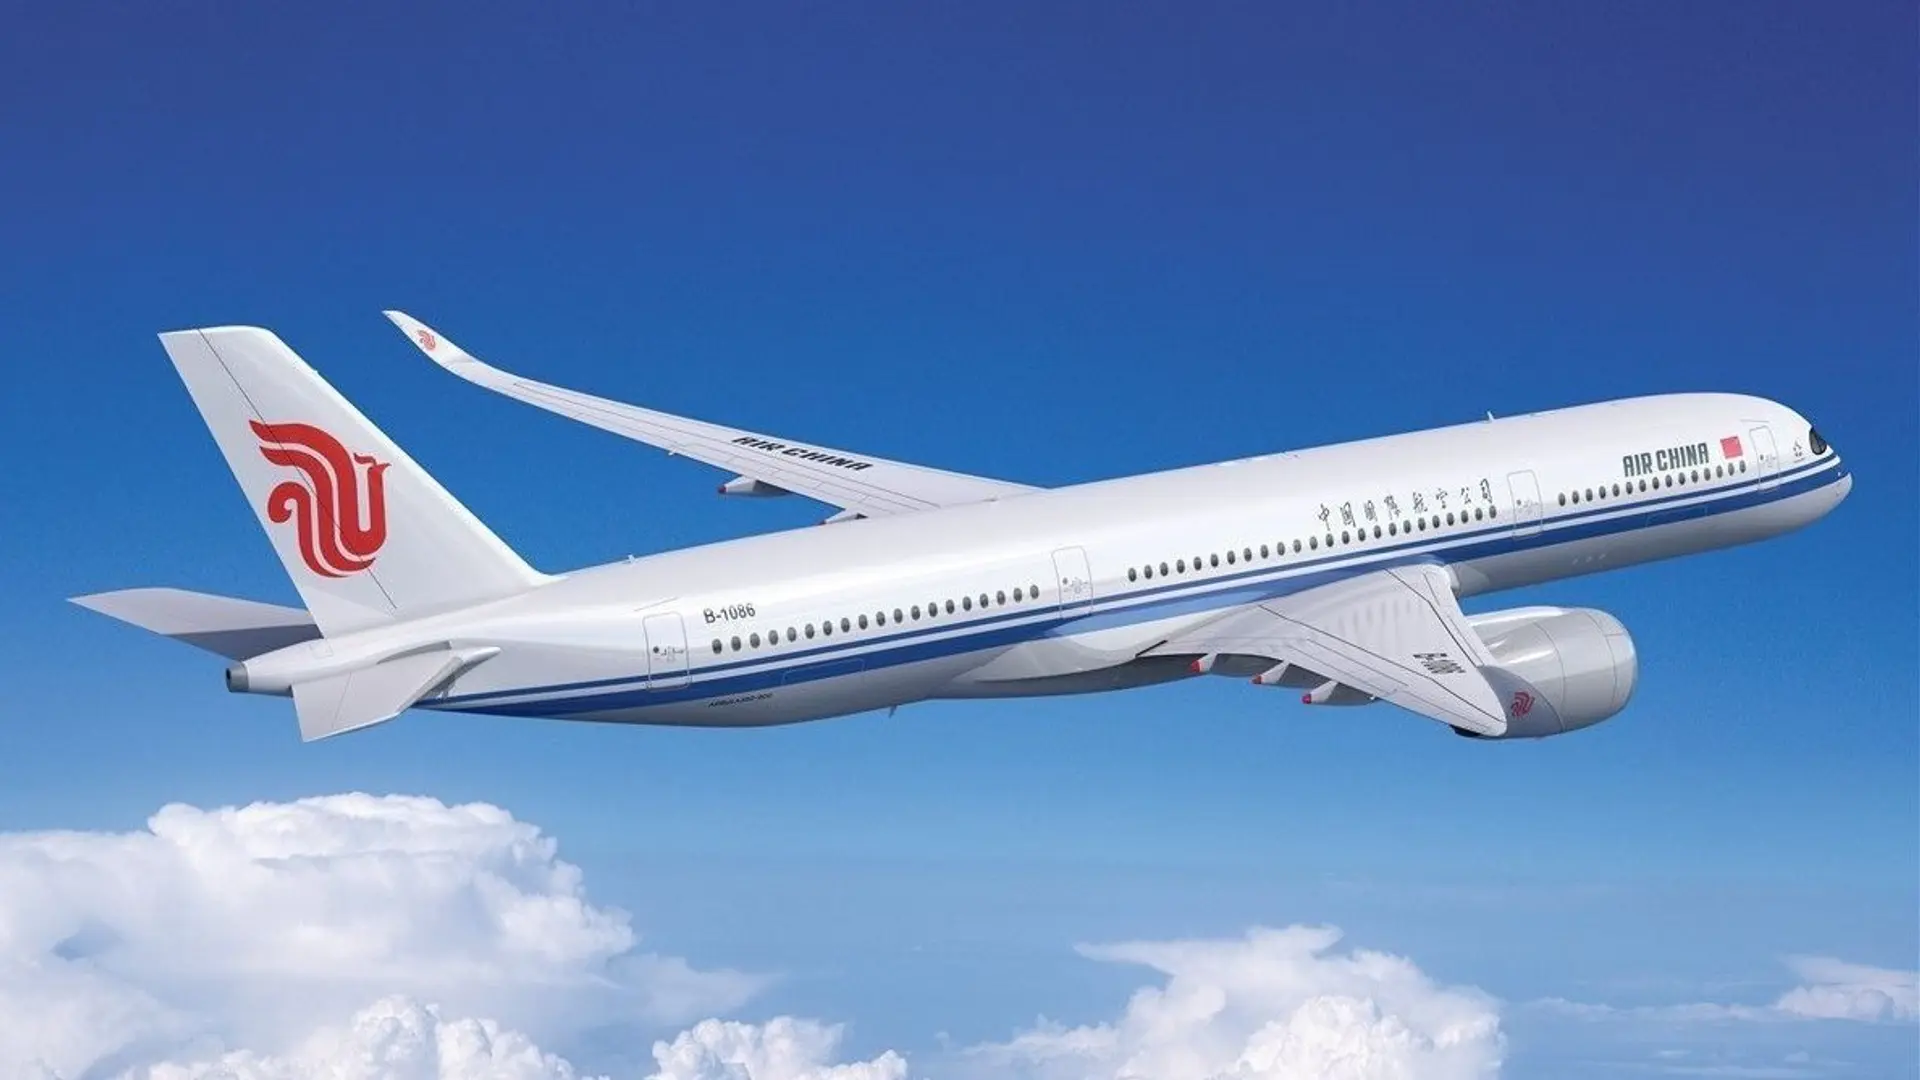 Airlines Articles - Air China launches new Business Class suite